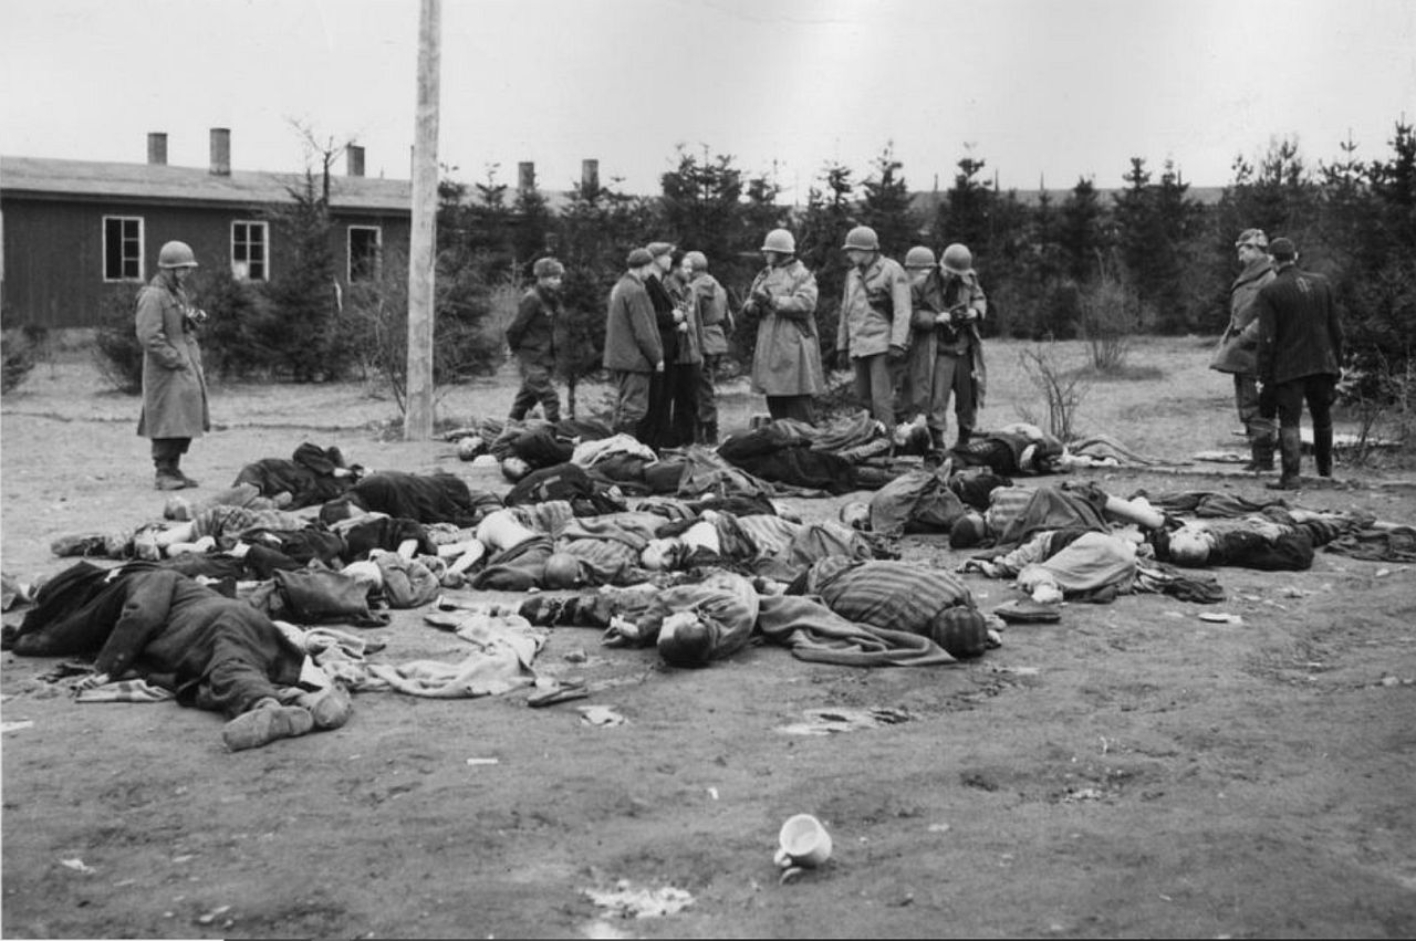  American soldiers and surviving prisoners stand in front of the bodies of murdered prisoners of the Buchenwald subcamp Ohrdruf (North Camp).